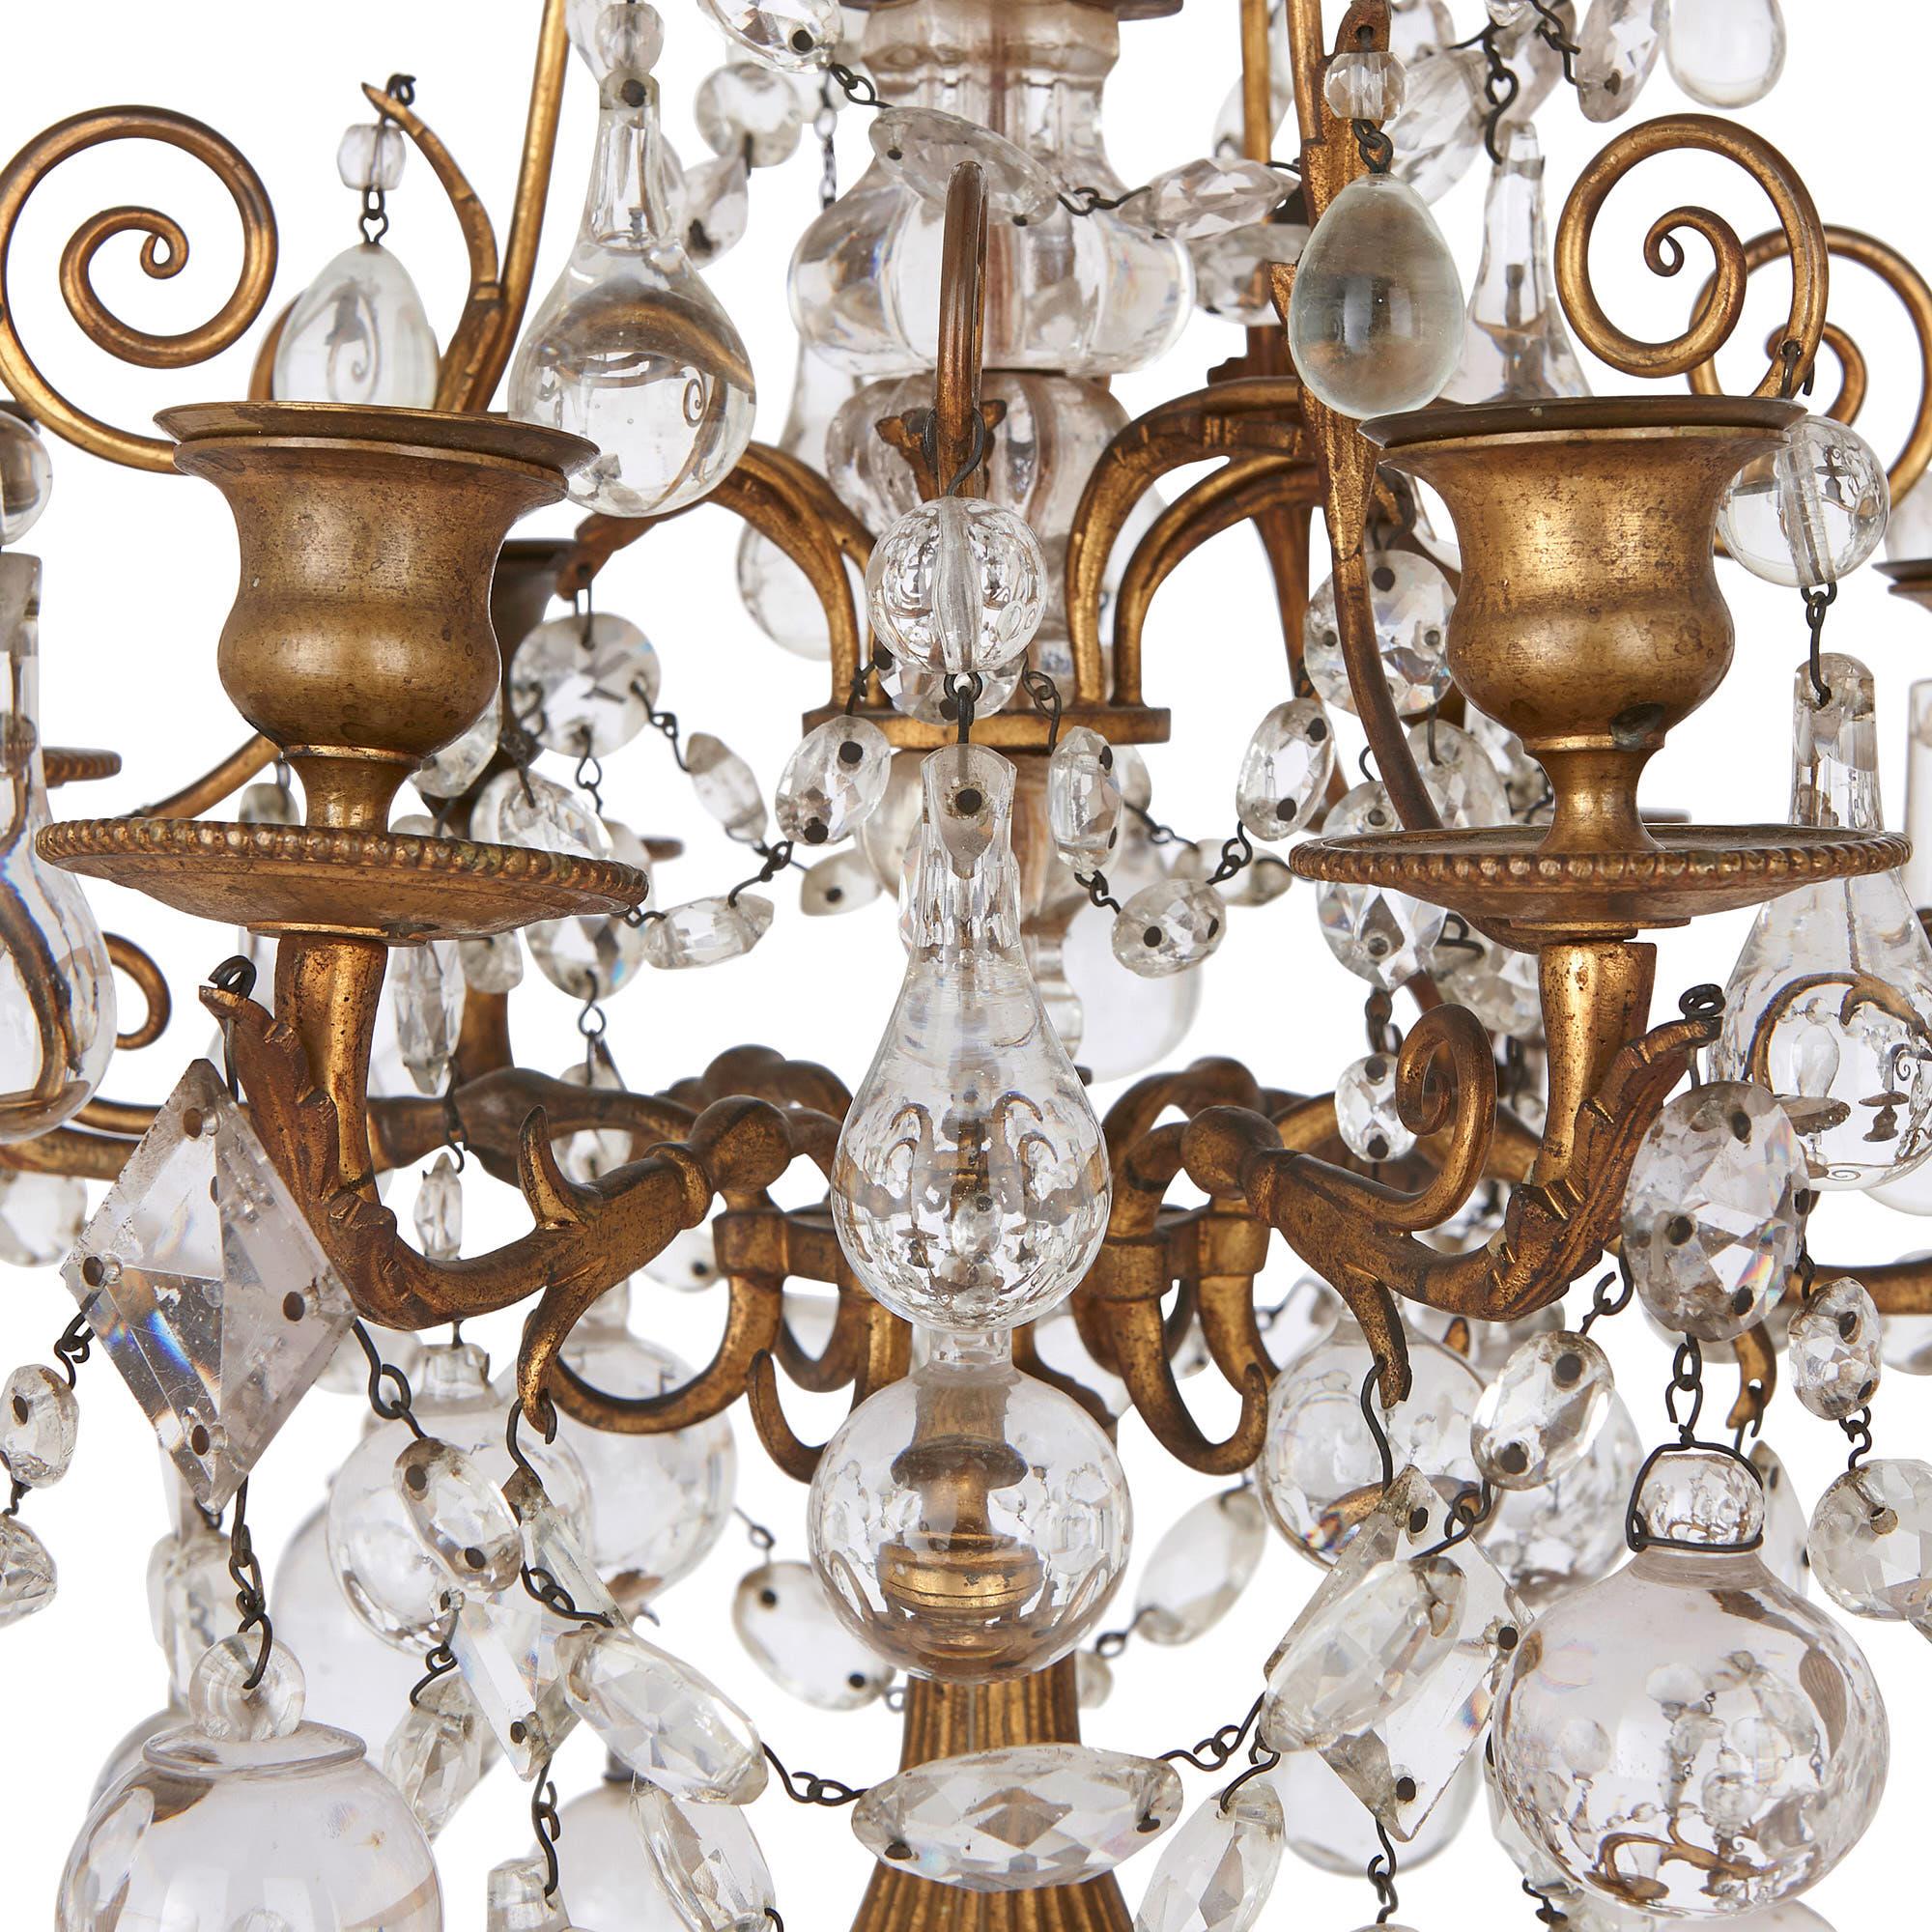 These two candelabra were created in France at the turn of thecentury, crafted from gilt bronze and fine cut glass. The candelabra stand on baluster-shaped, fluted gilt bronze stems, which are set on circular bases with beaded edges. Each